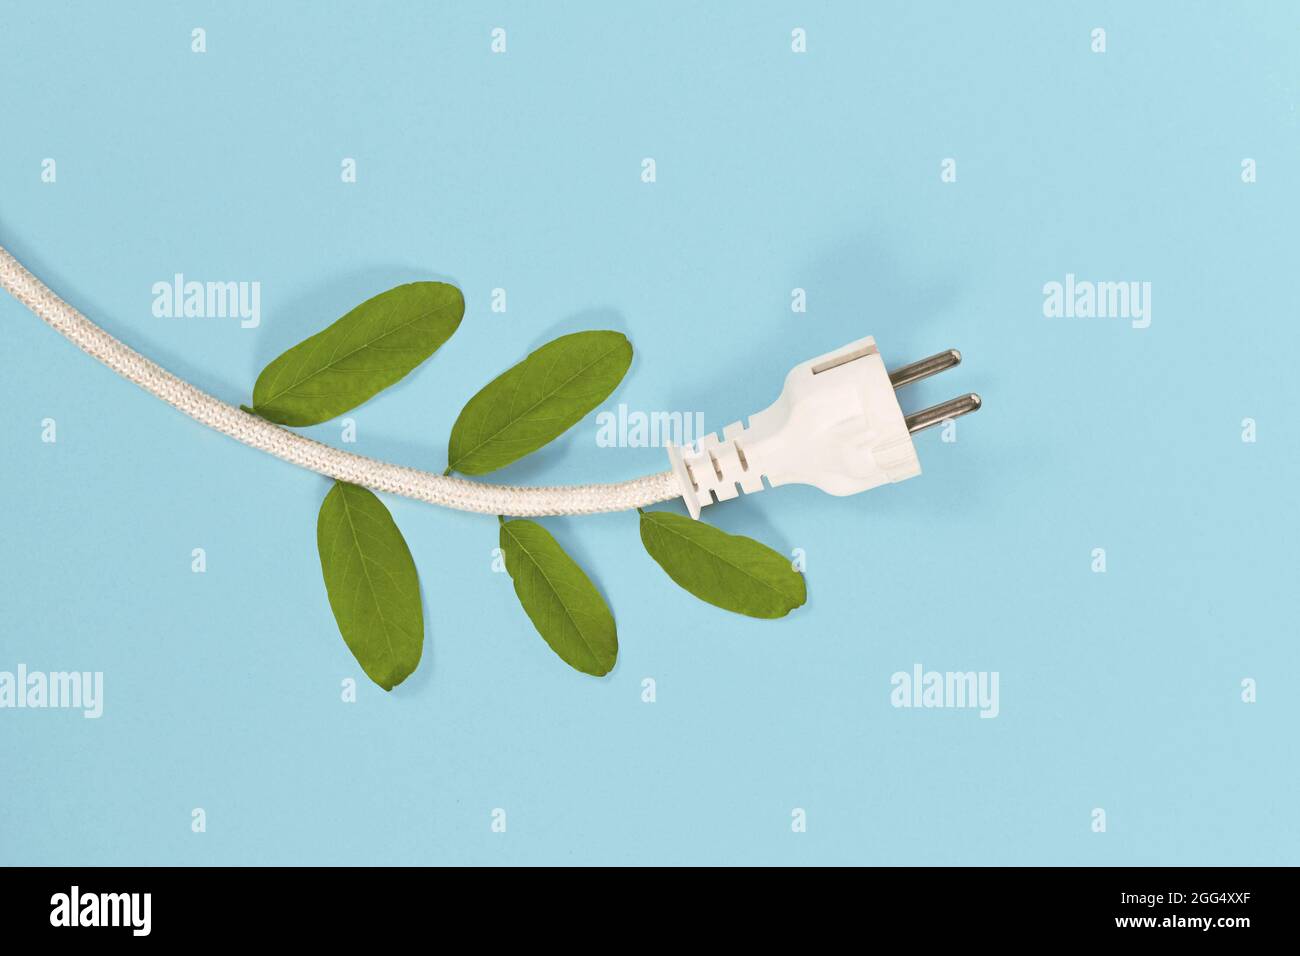 Renewable Energy concept with electric cord and plug with natural leaves on blue background Stock Photo